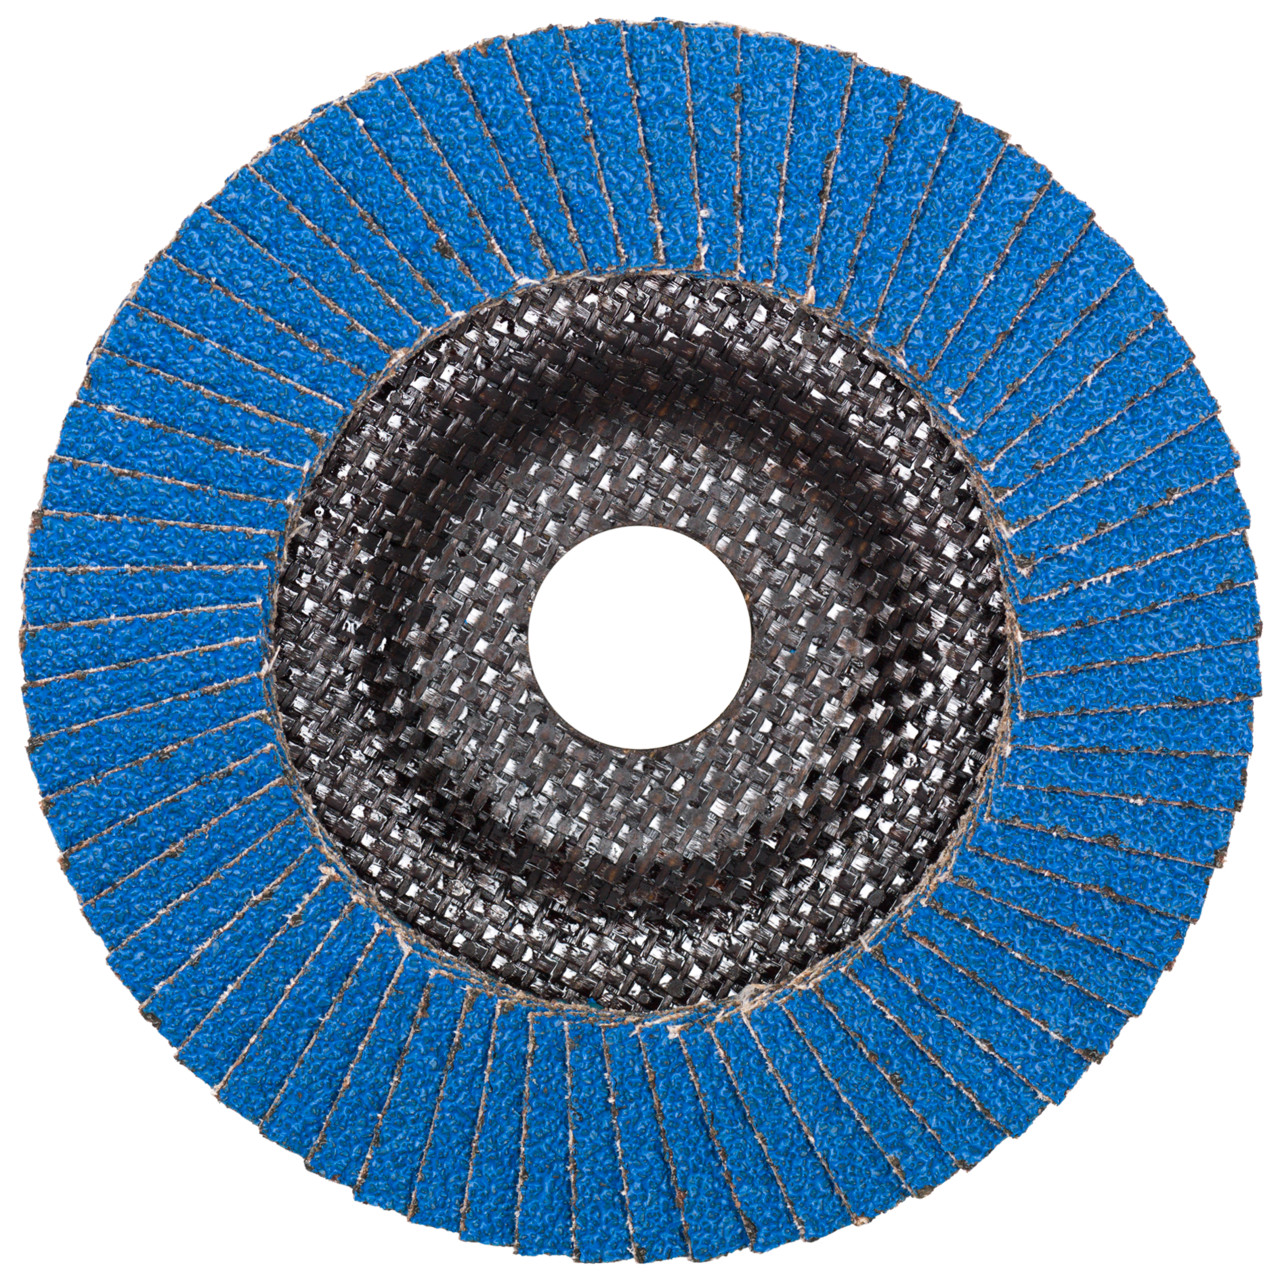 Tyrolit Serrated lock washer DxH 150x22.23 FASTCUT for steel &amp; stainless steel, P80, shape: 28A - straight version (glass fibre carrier body version), Art. 34166366